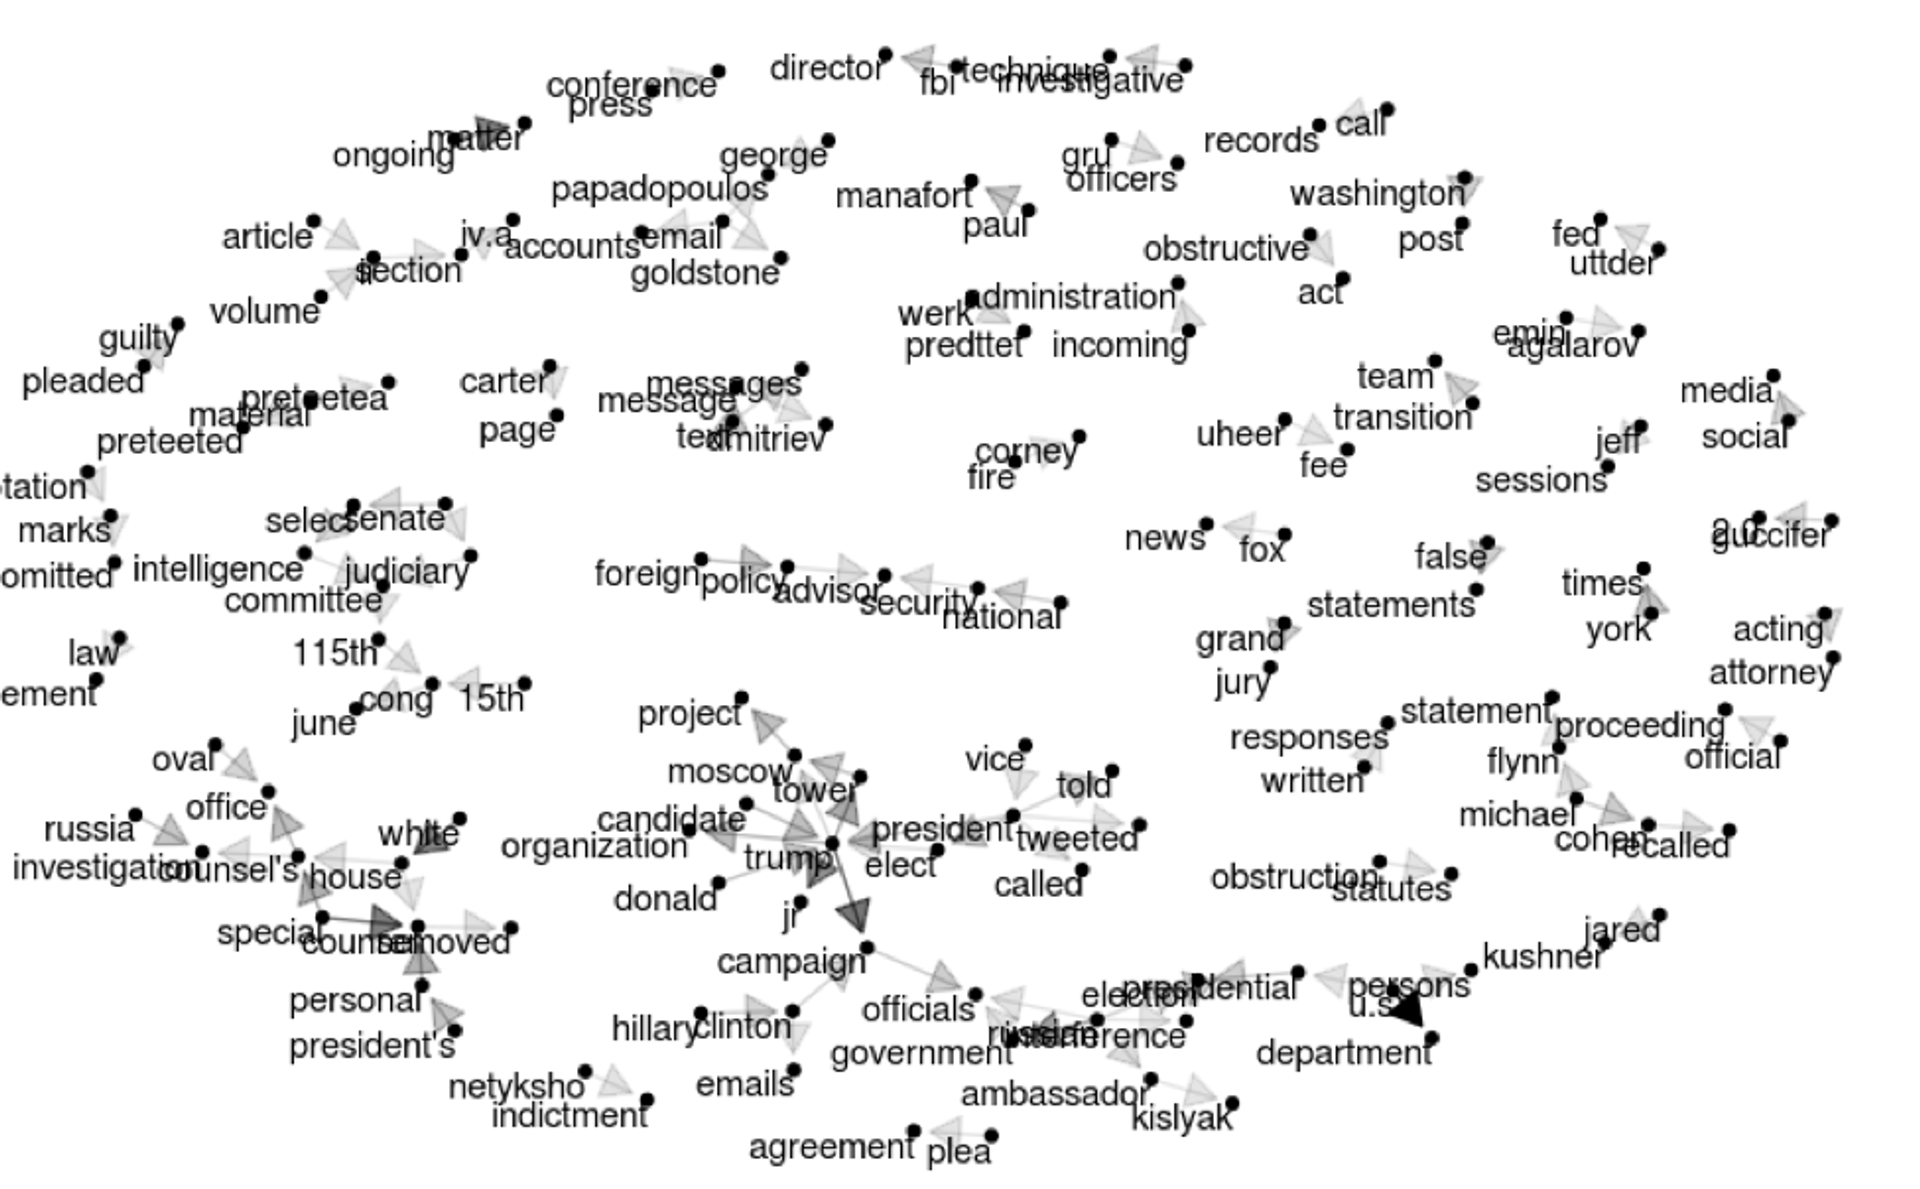 Network graph of text from the mueller report